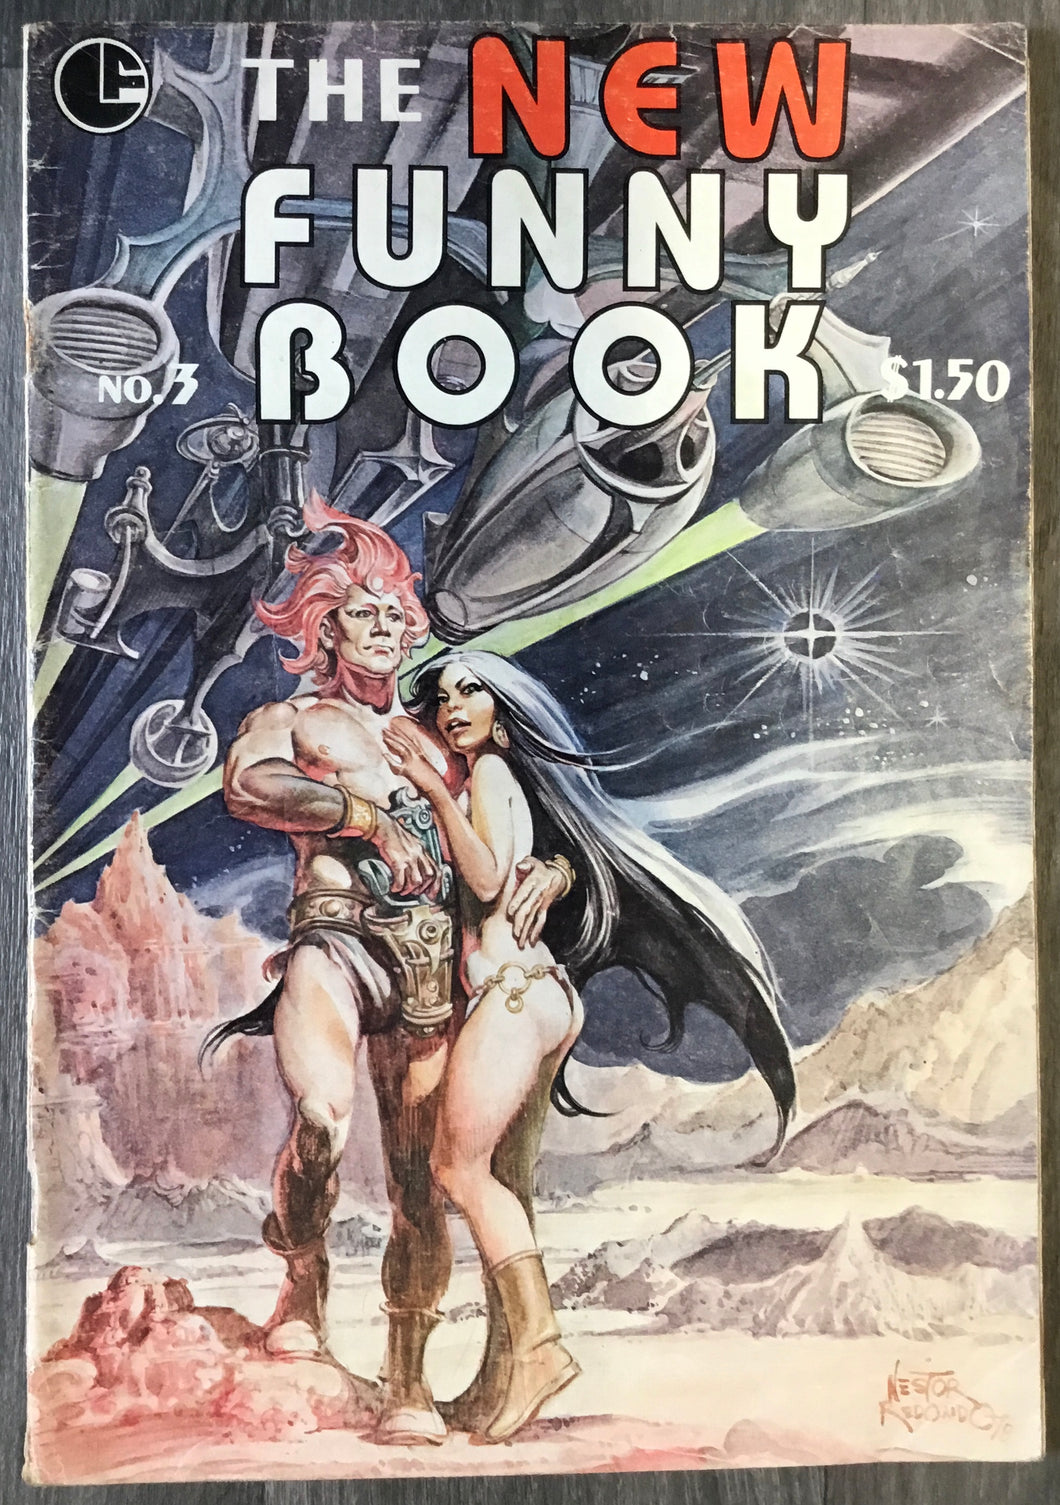 The New Funny Book No. #3 1978 Larry Fuller Presents